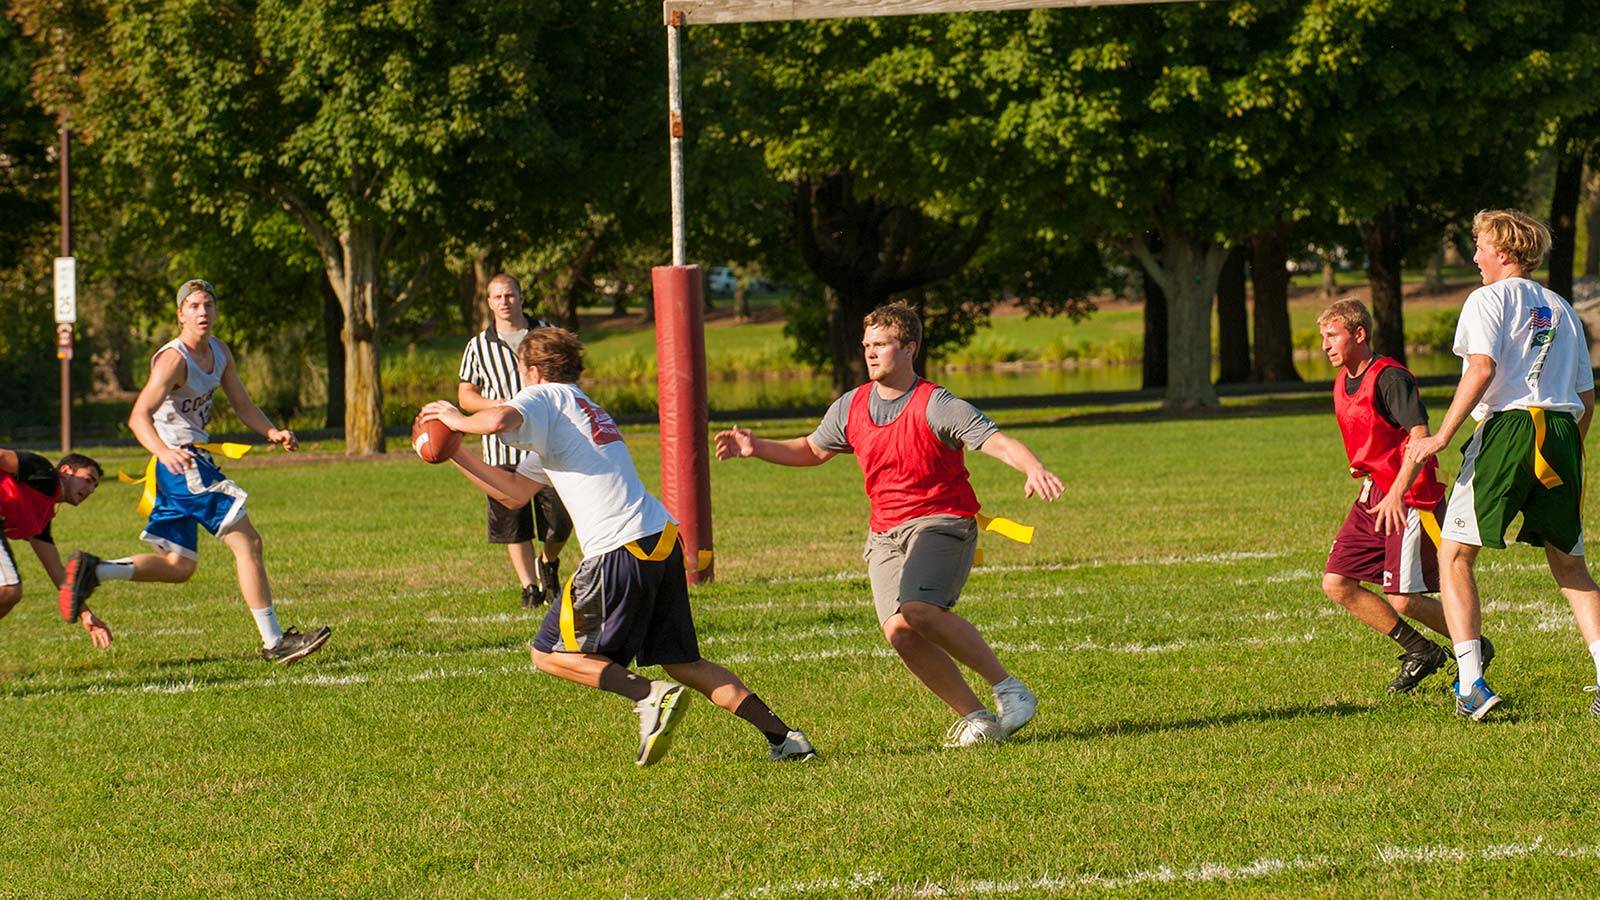 A student official watches a play unfold in intramural flag football